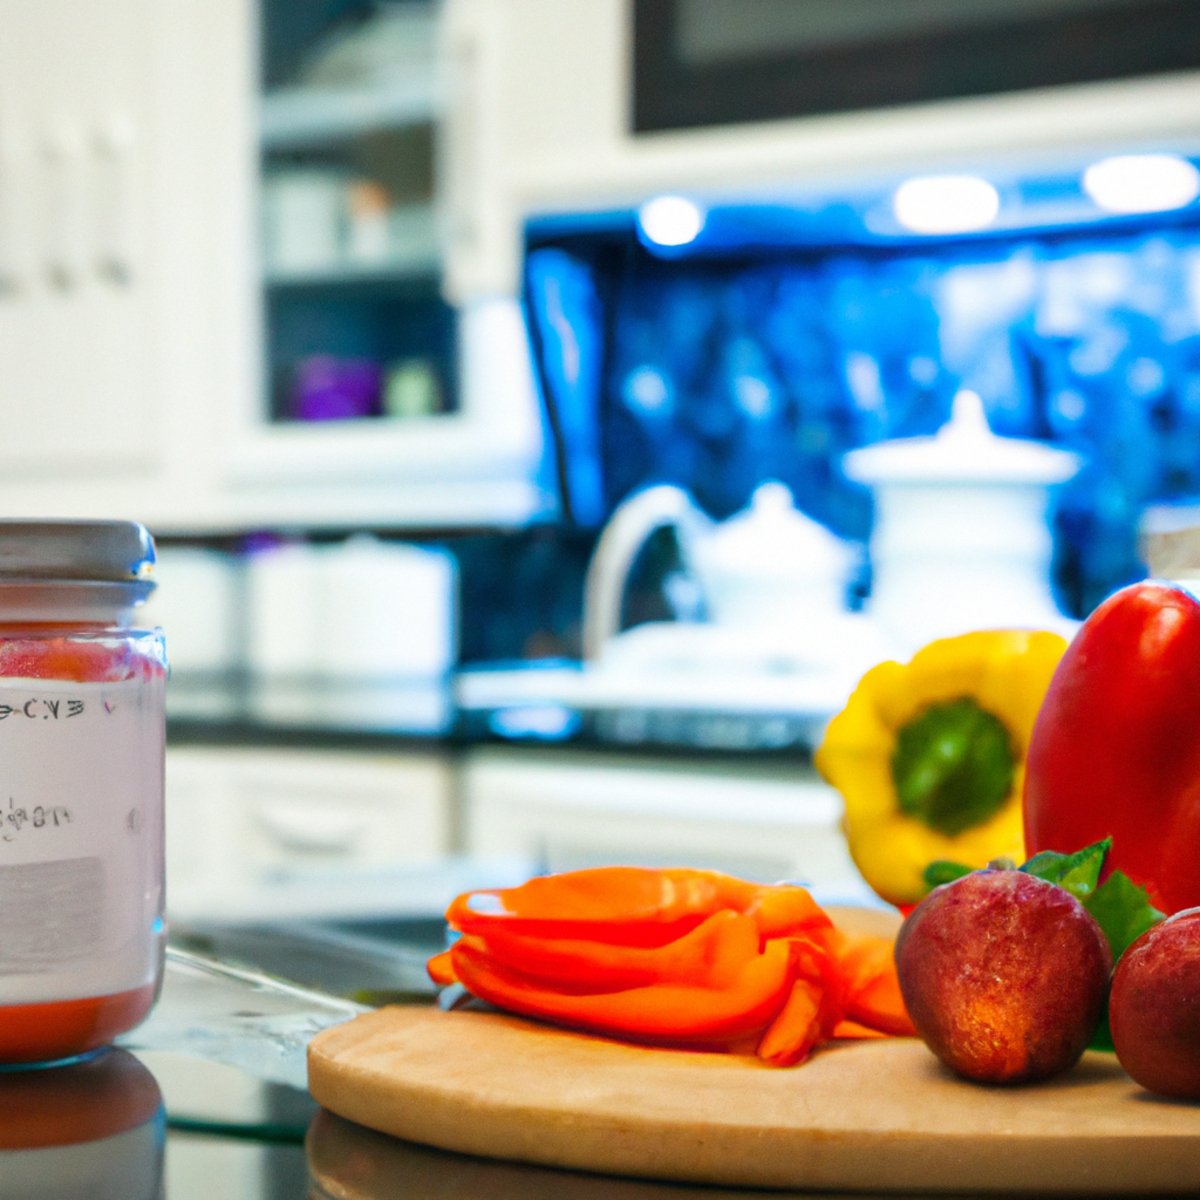 The photo features a wooden cutting board with a variety of colorful fruits and vegetables, including sliced bell peppers, carrots, and strawberries. In the foreground, a glass jar of homemade sauerkraut sits next to a small dish of Greek yogurt. The background is blurred, but hints of a kitchen can be seen, with a stainless steel refrigerator and a wooden countertop. The overall impression is one of health and vitality, with the vibrant colors of the produce and the natural, wholesome feel of the setting.